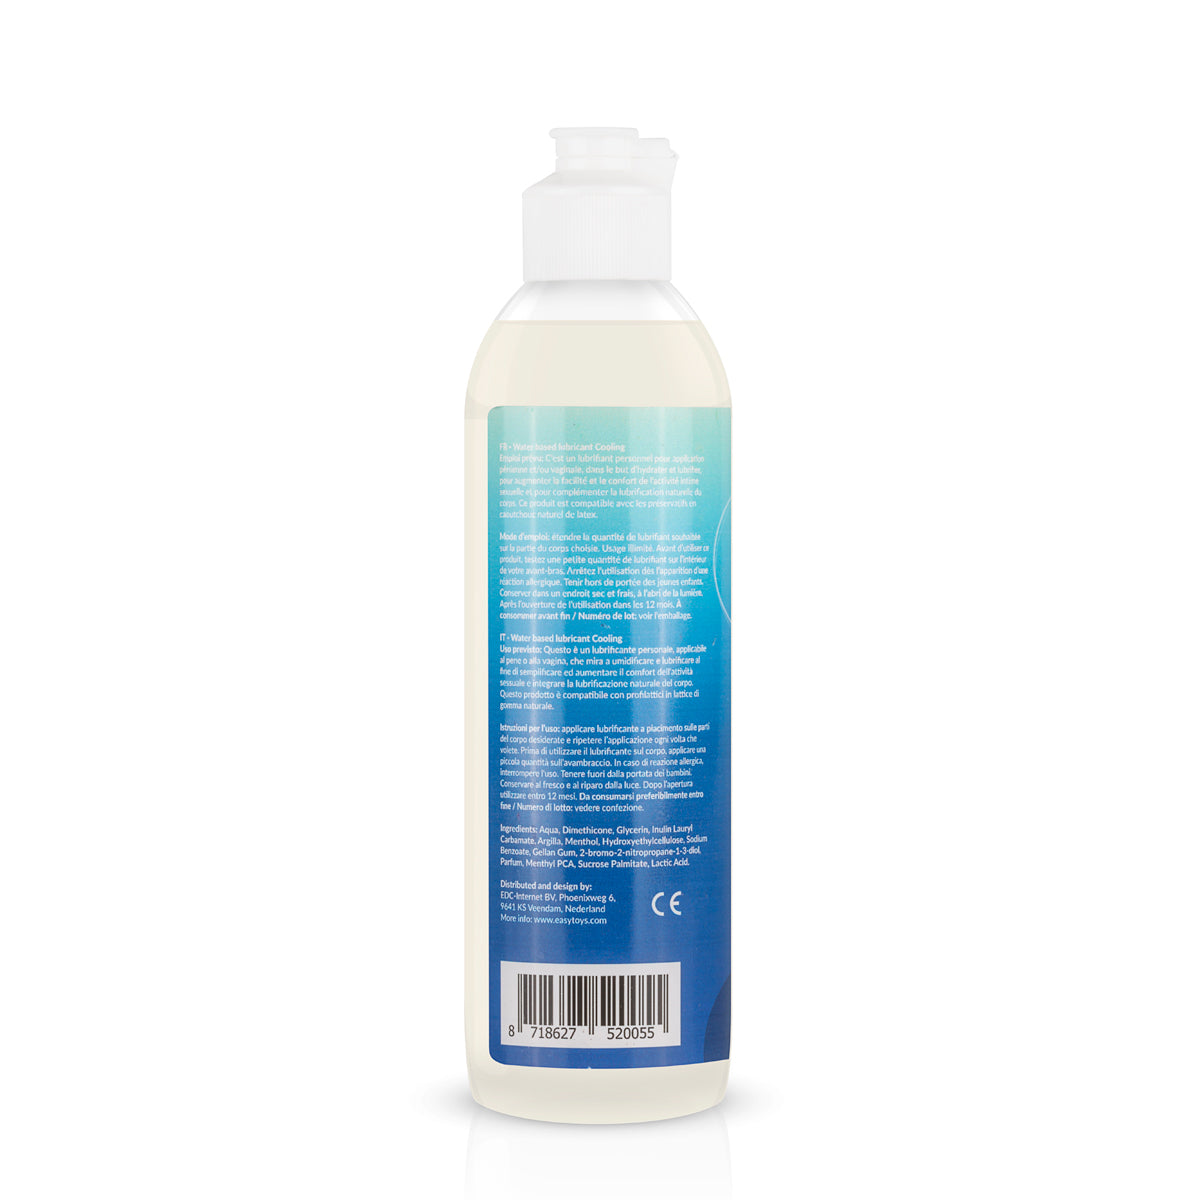 EasyGlide cooling lubricant 150 ml